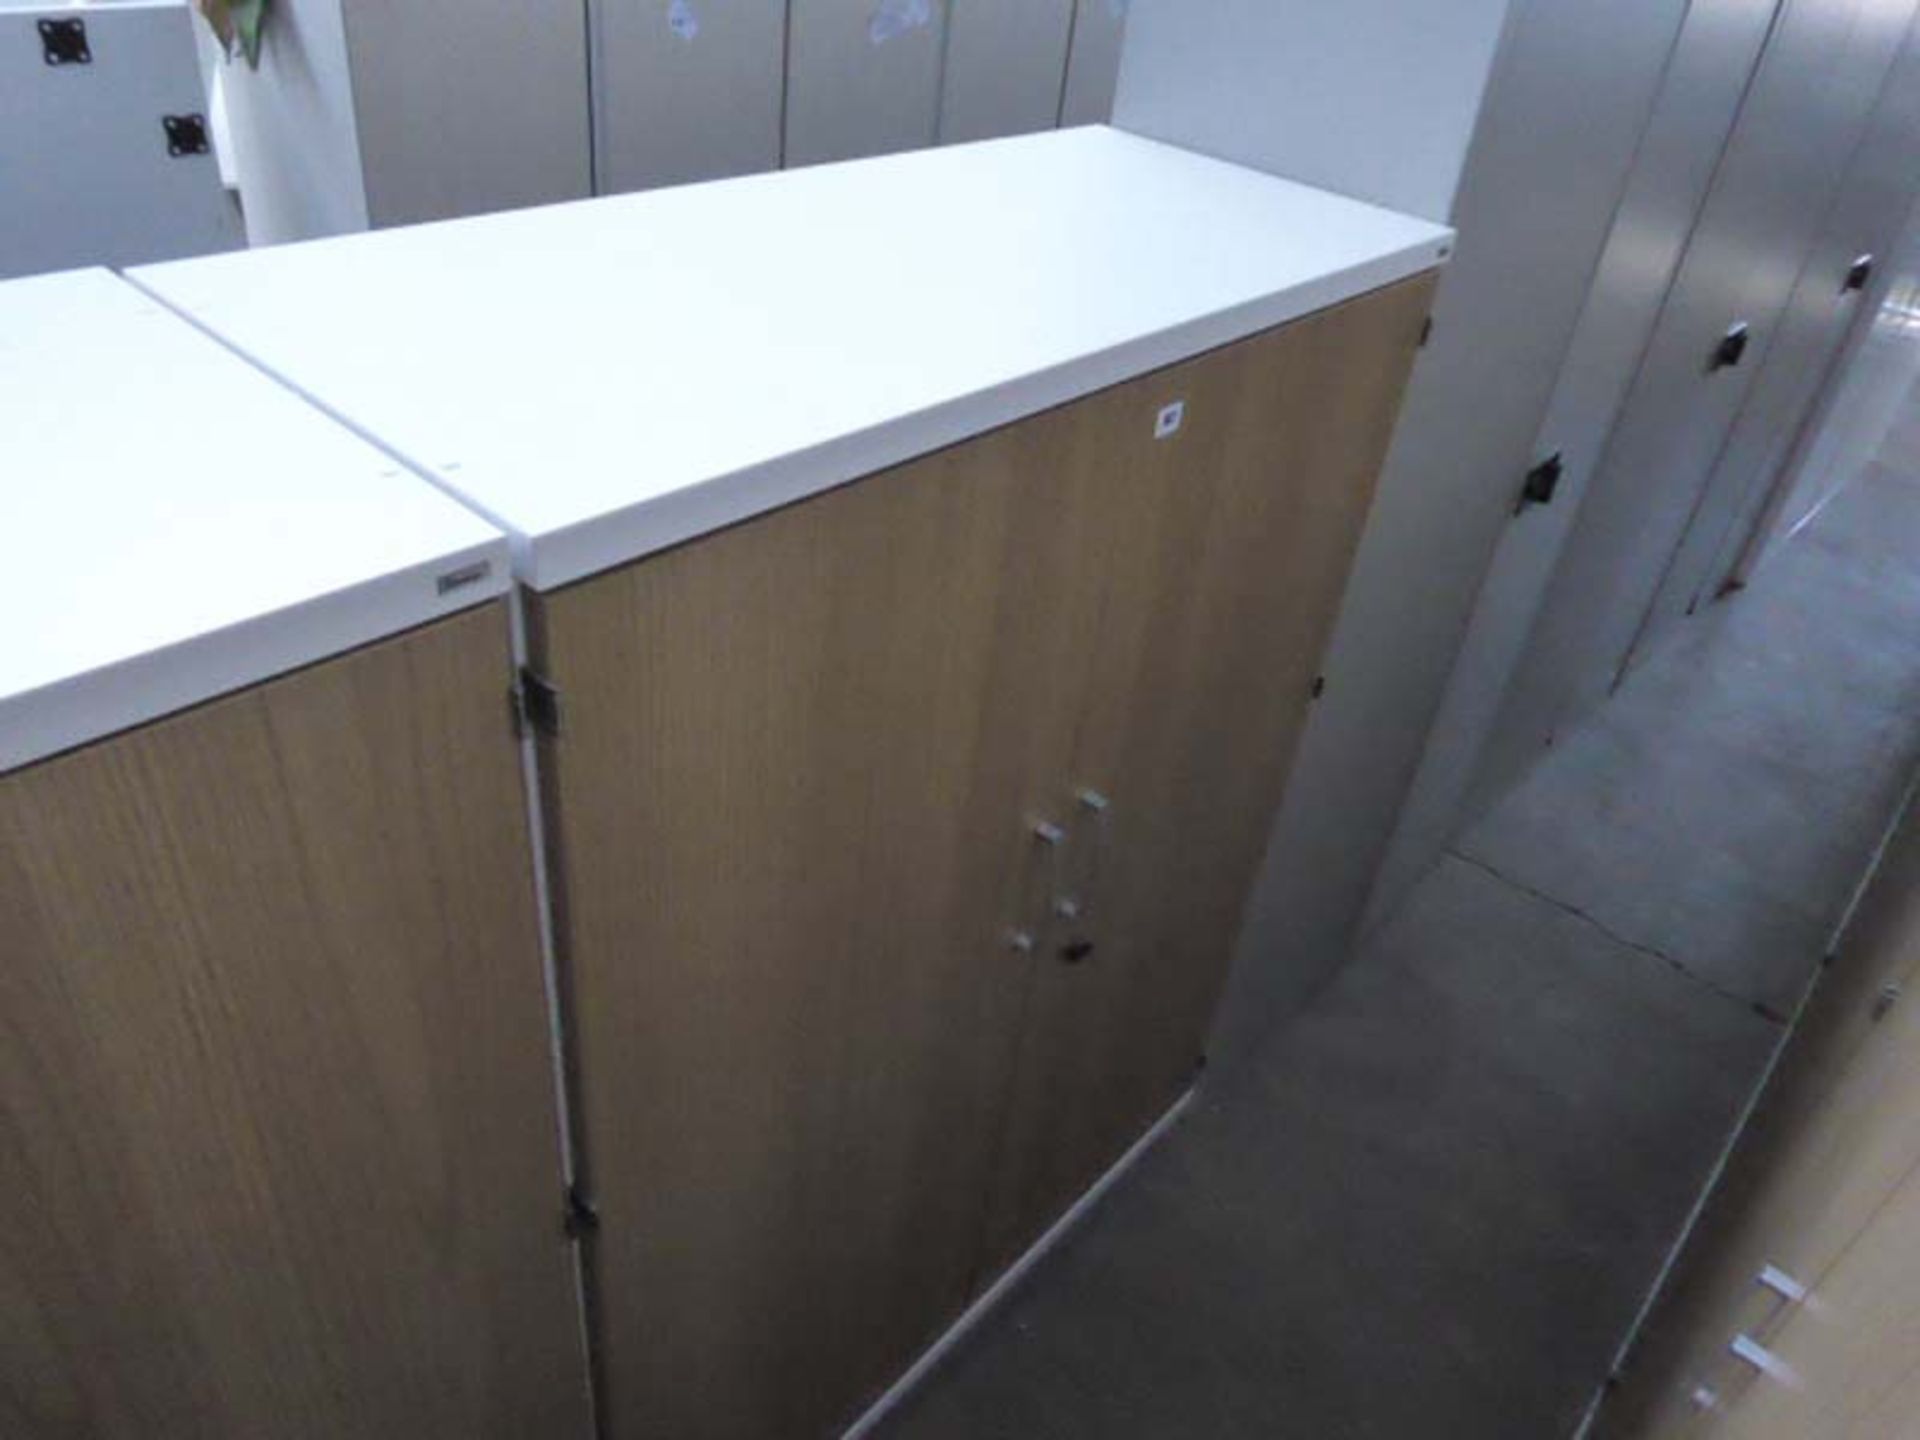 A 100cm wide by 134cm high Kinnarps white and oak effect 2 door stationary cupboard